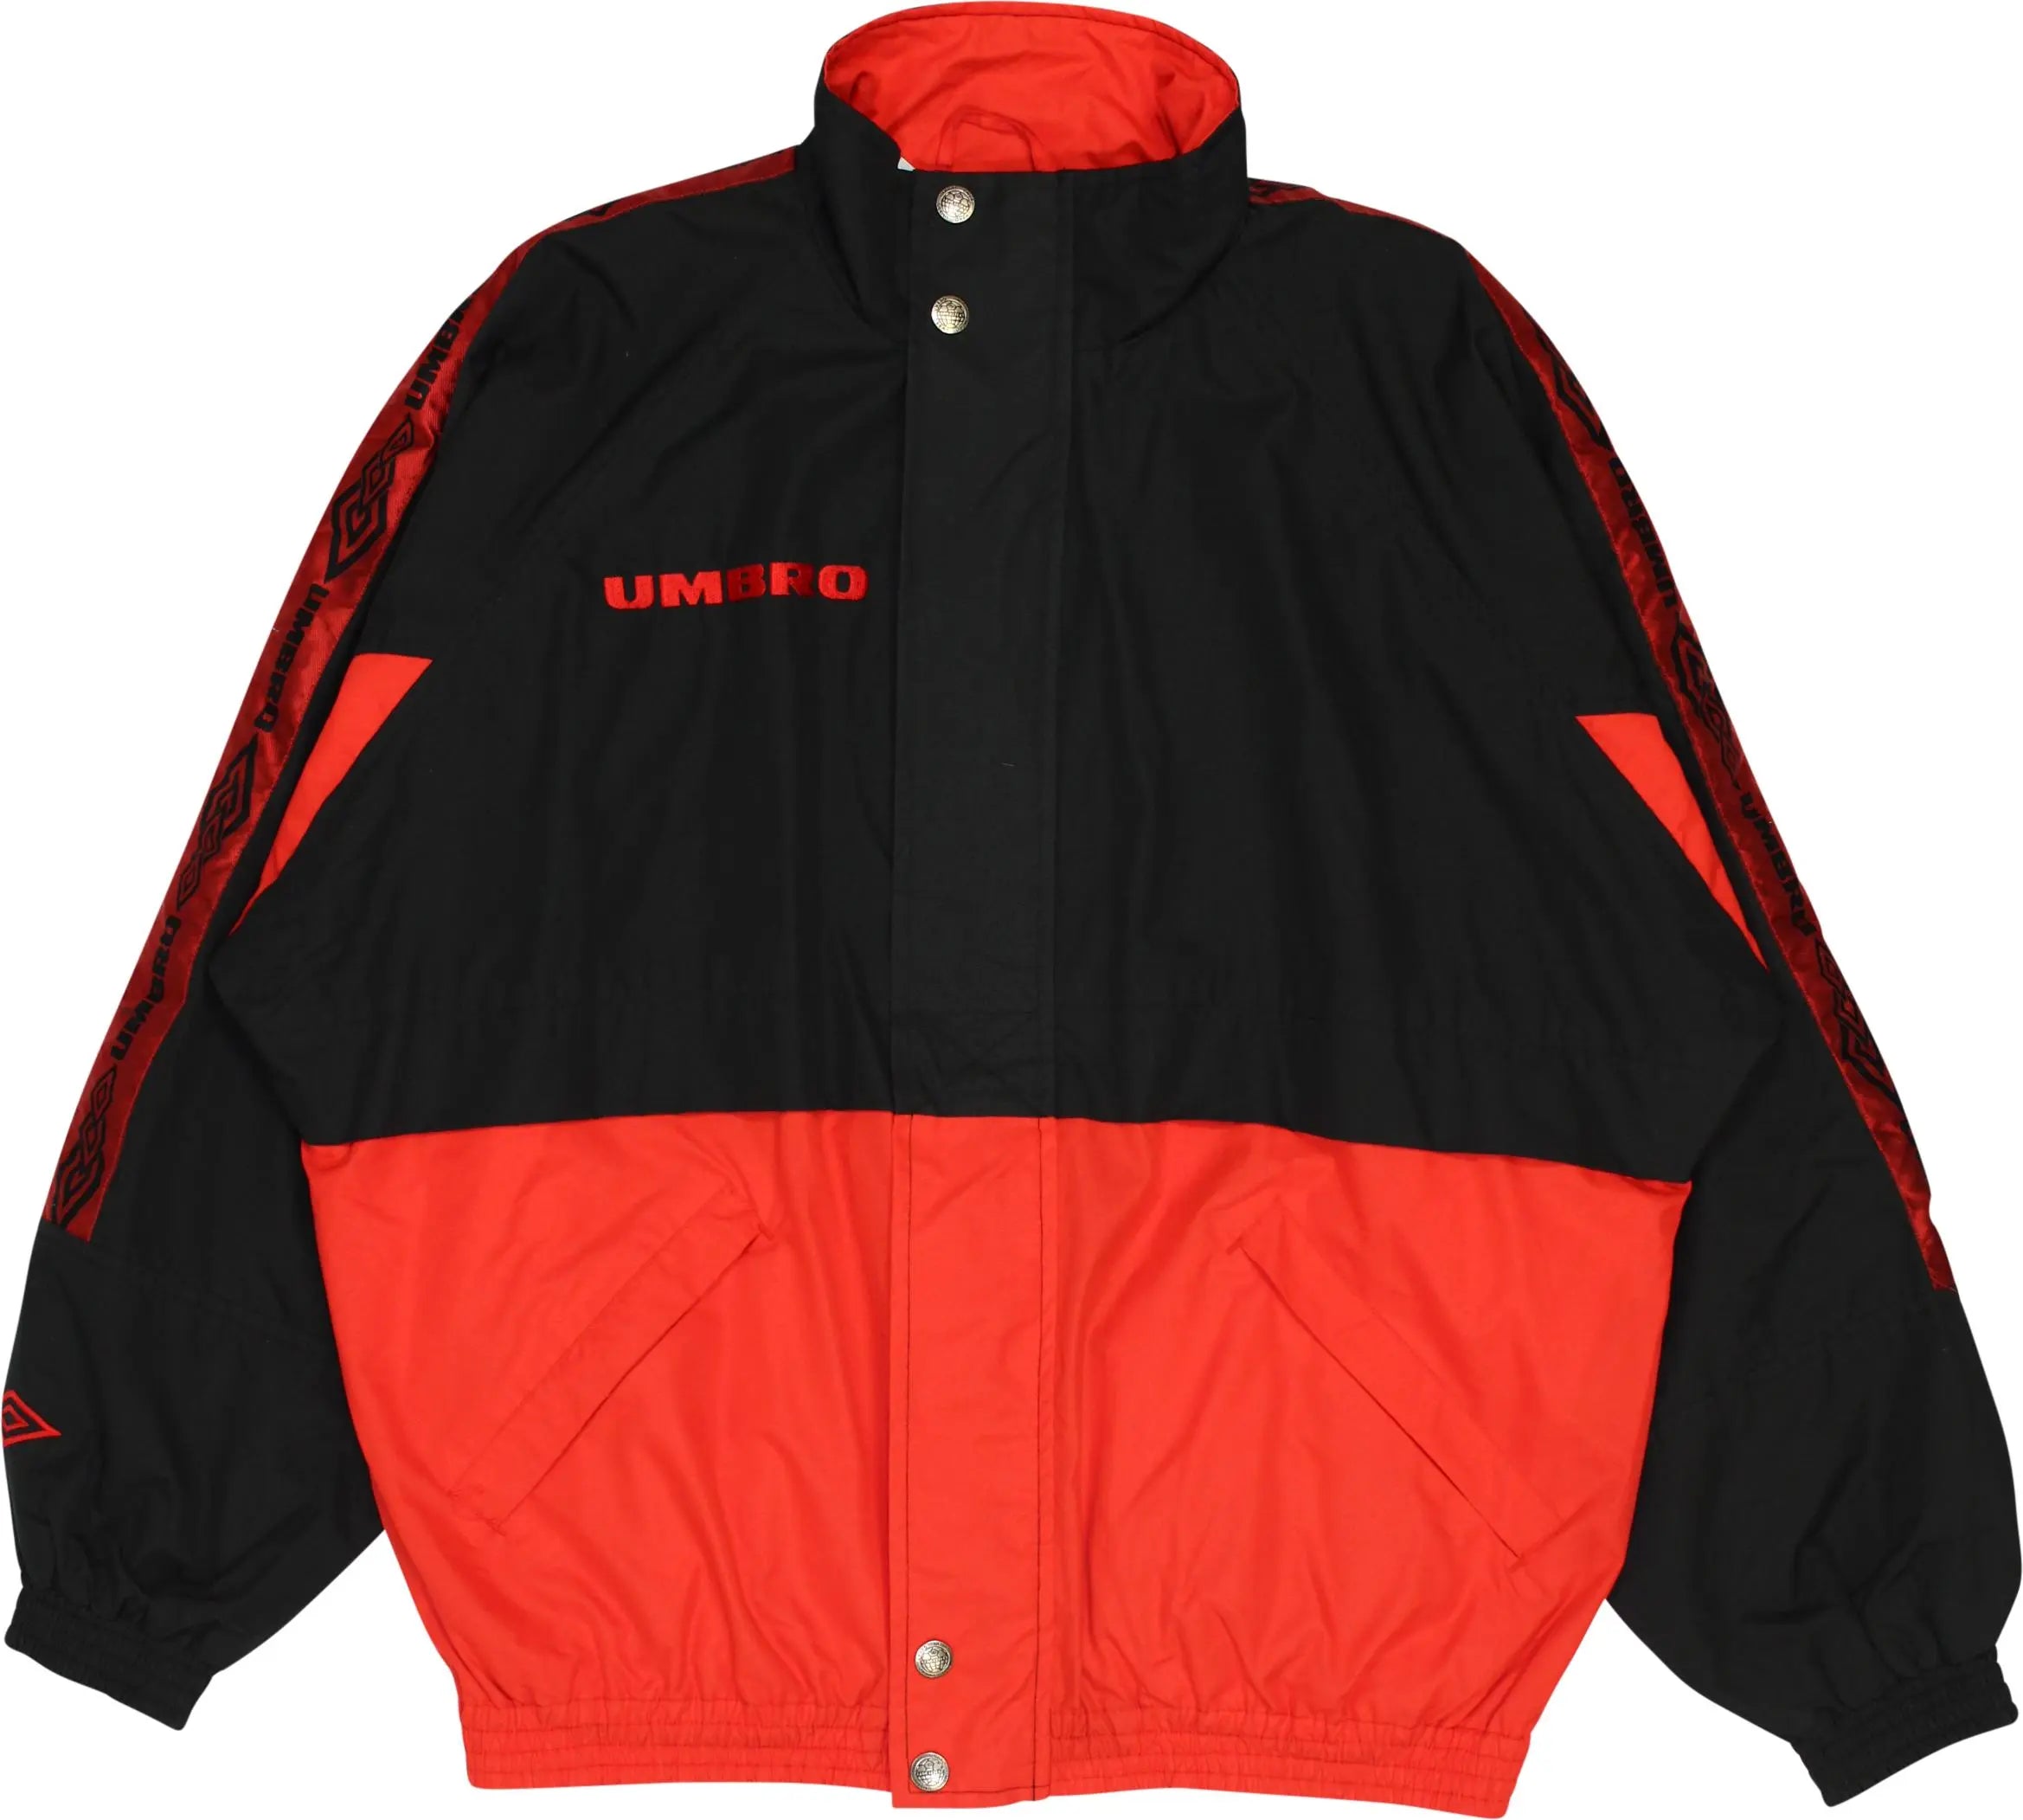 Umbro - 90s Black Jacket by Umbro- ThriftTale.com - Vintage and second handclothing